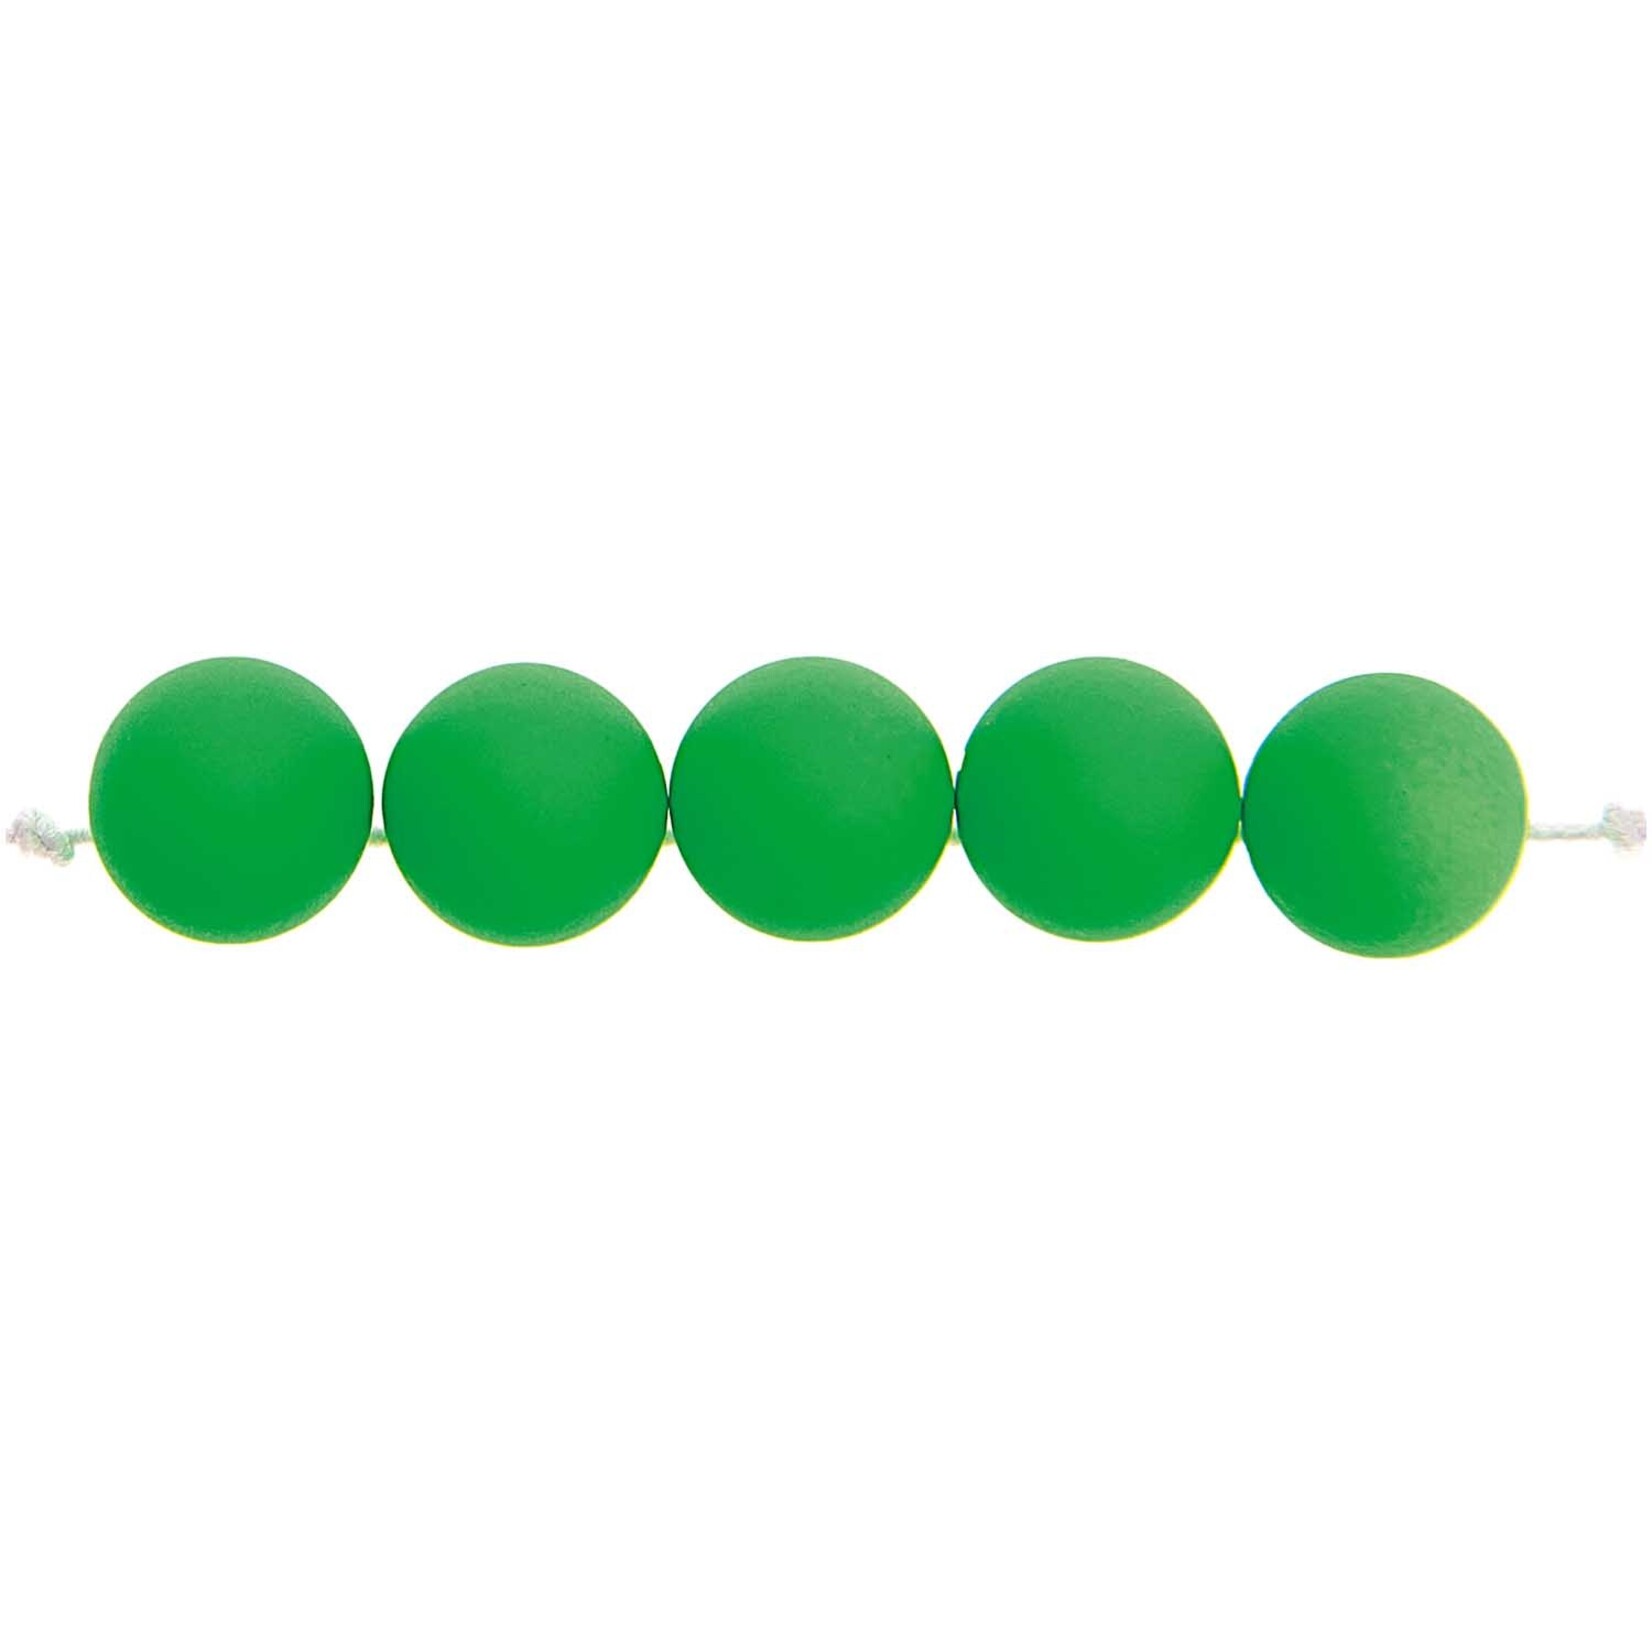 RICO Plastic beads, neon green, asymmetric, 40 pcs, Ã˜ 8 mm, Special perforation on top